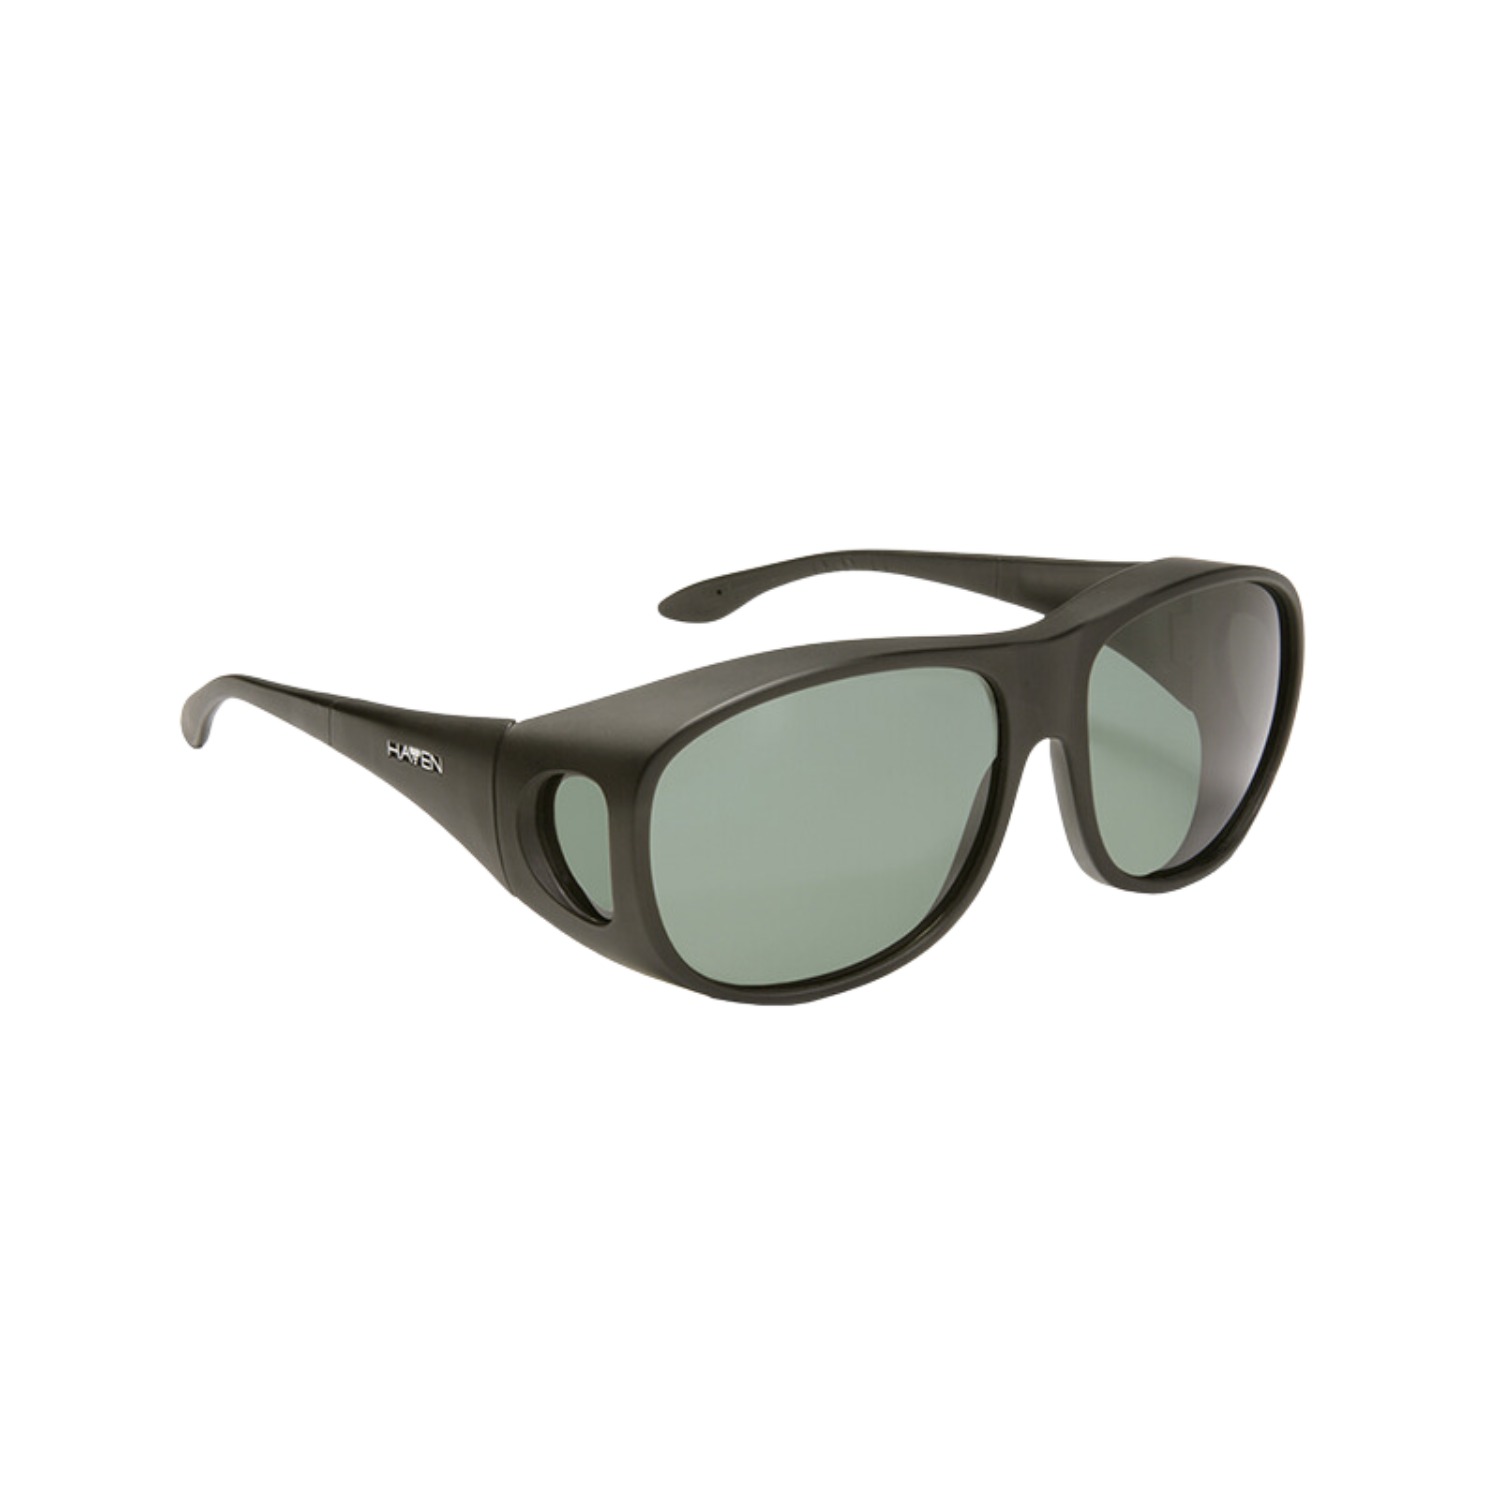 Image of the Haven Summerwood large git-over polarized sunglasses with gray tint from Eschenbach.